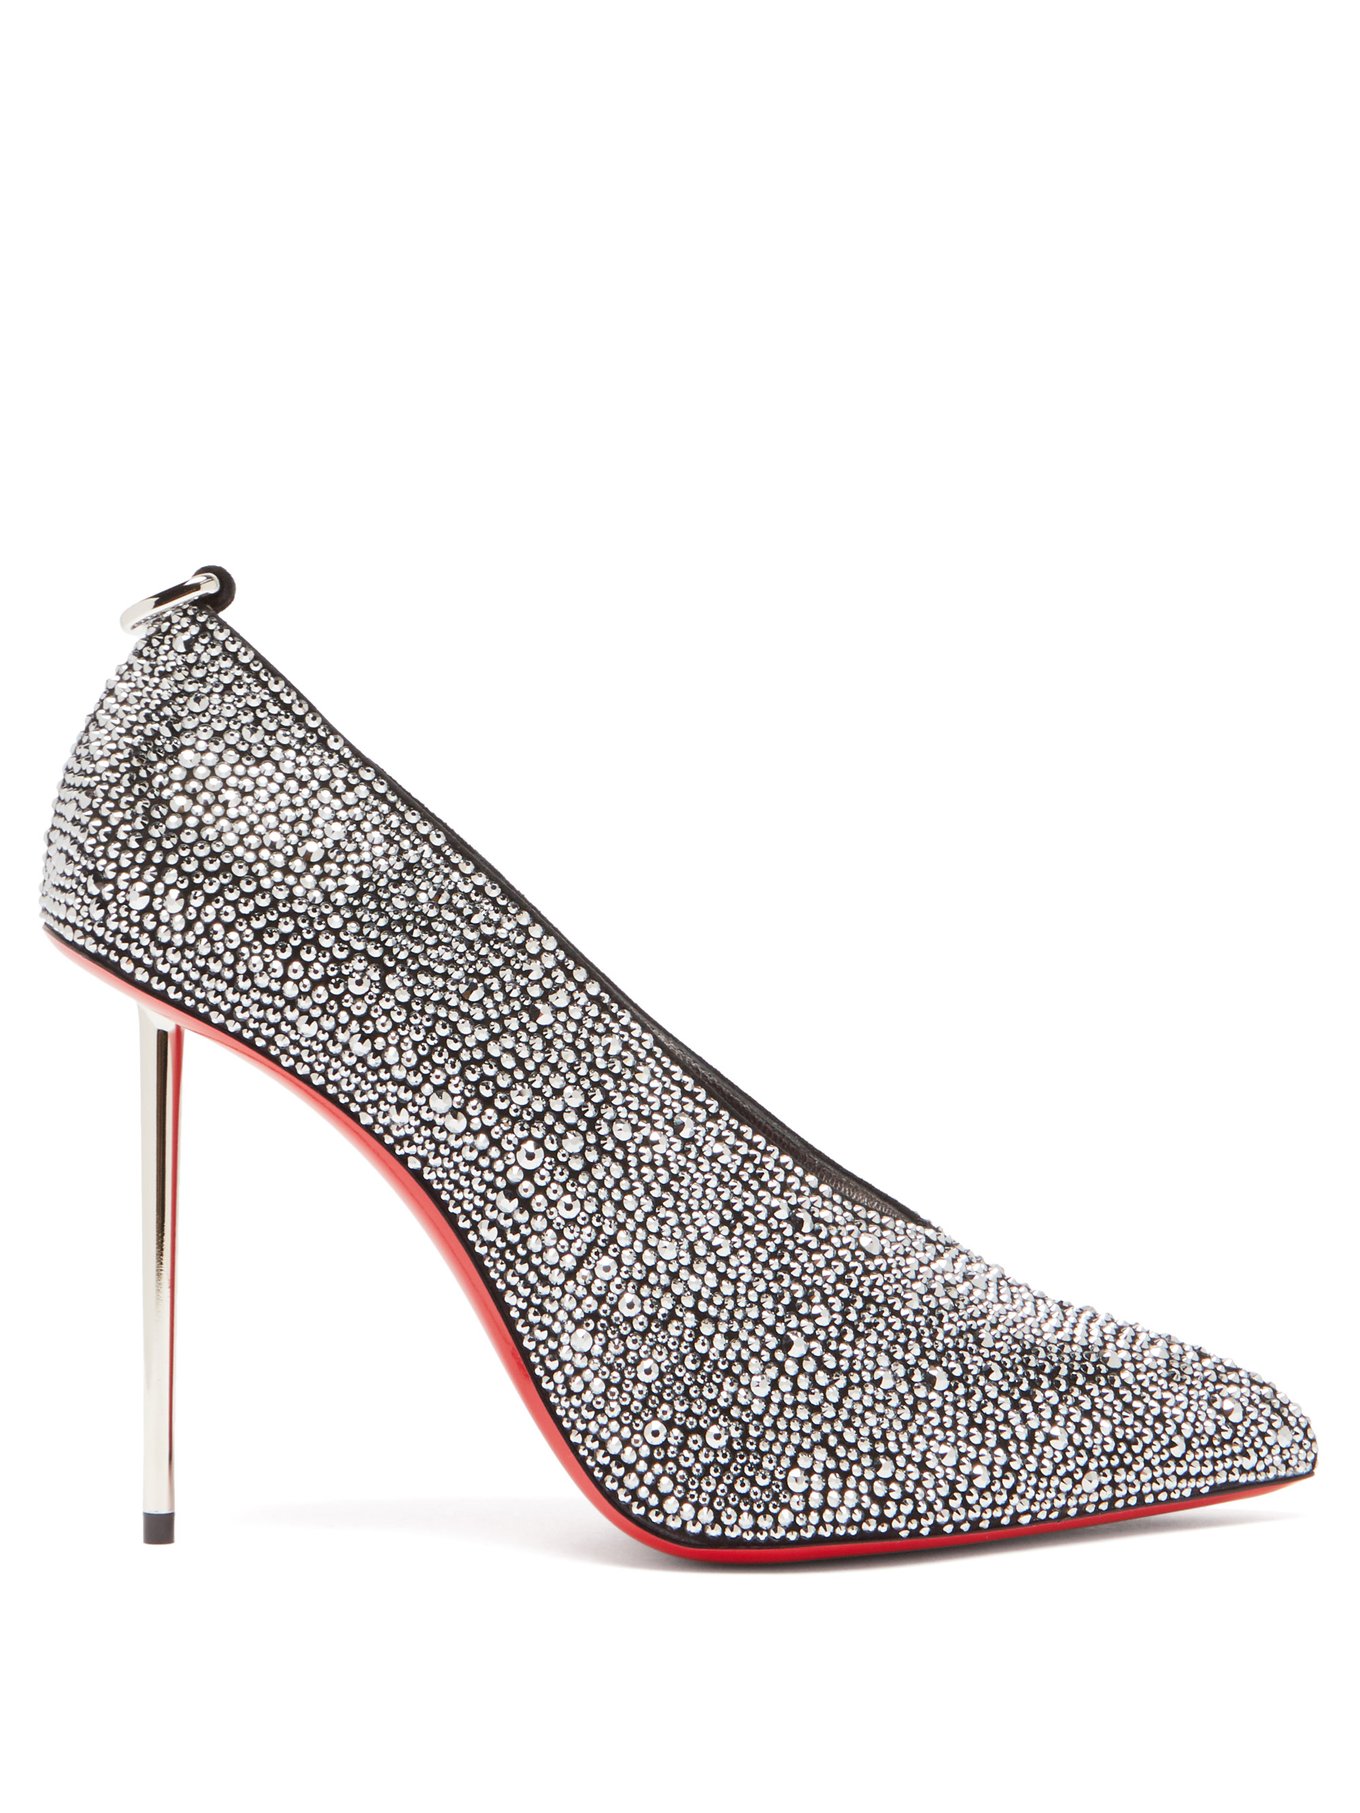 Et Pic Et 100 high-cut crystal and leather pumps | Christian Louboutin